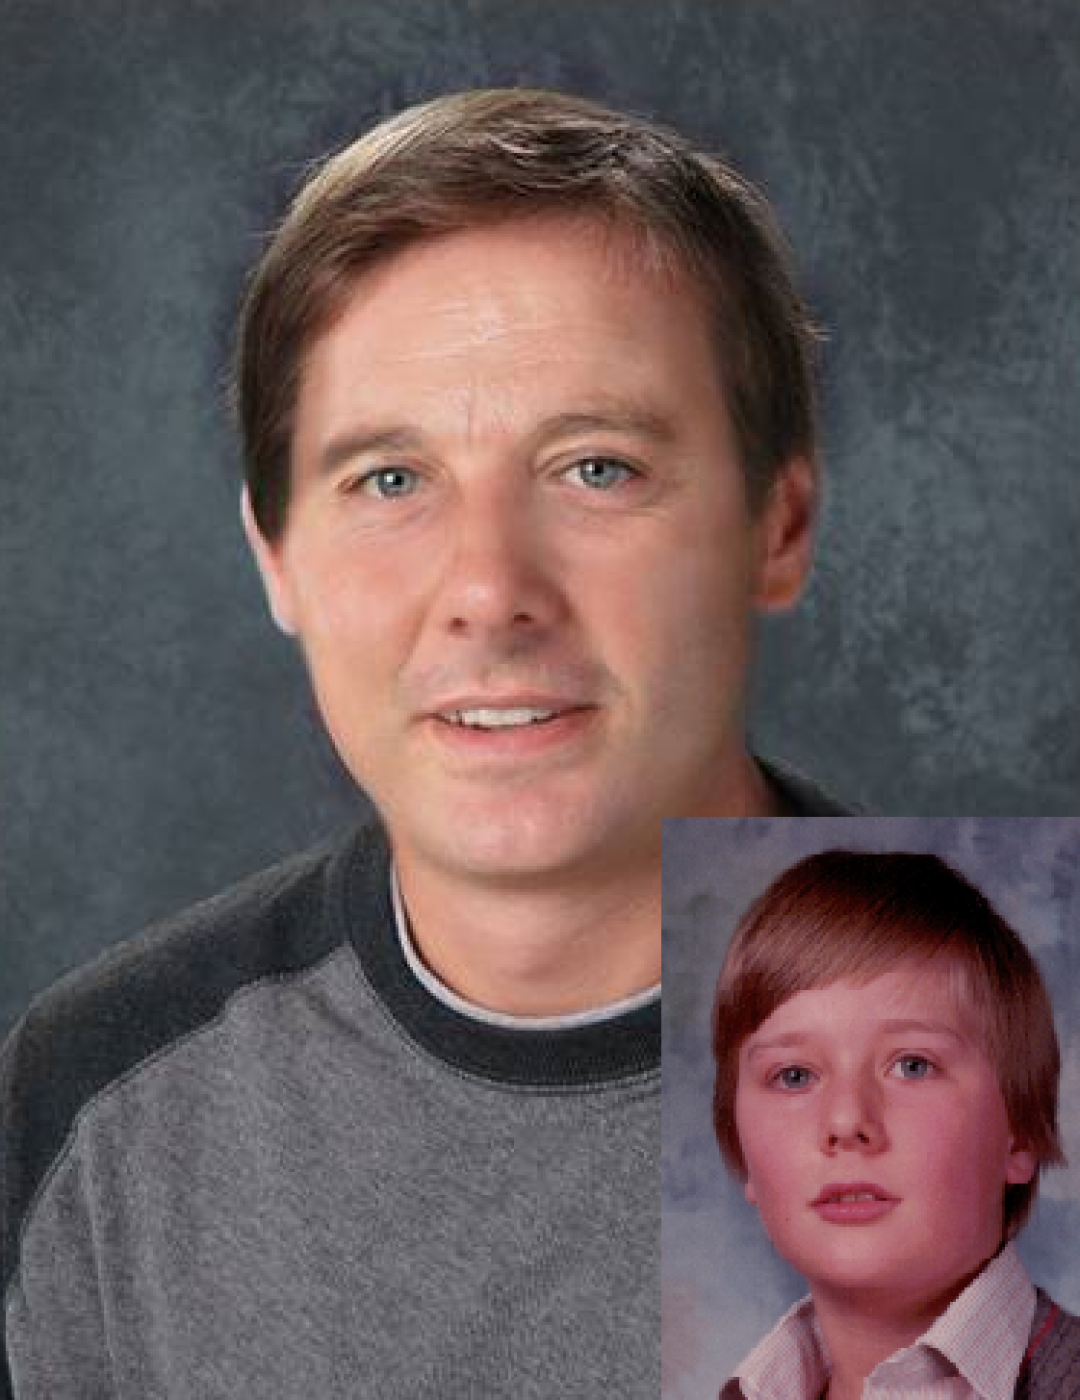 Taj Narbonne. Missing child with blonde hair and blue eyes. Age progressed photo shows what Taj looks like at 40 years old: adult man with short gray-blonde hair and blue eyes.